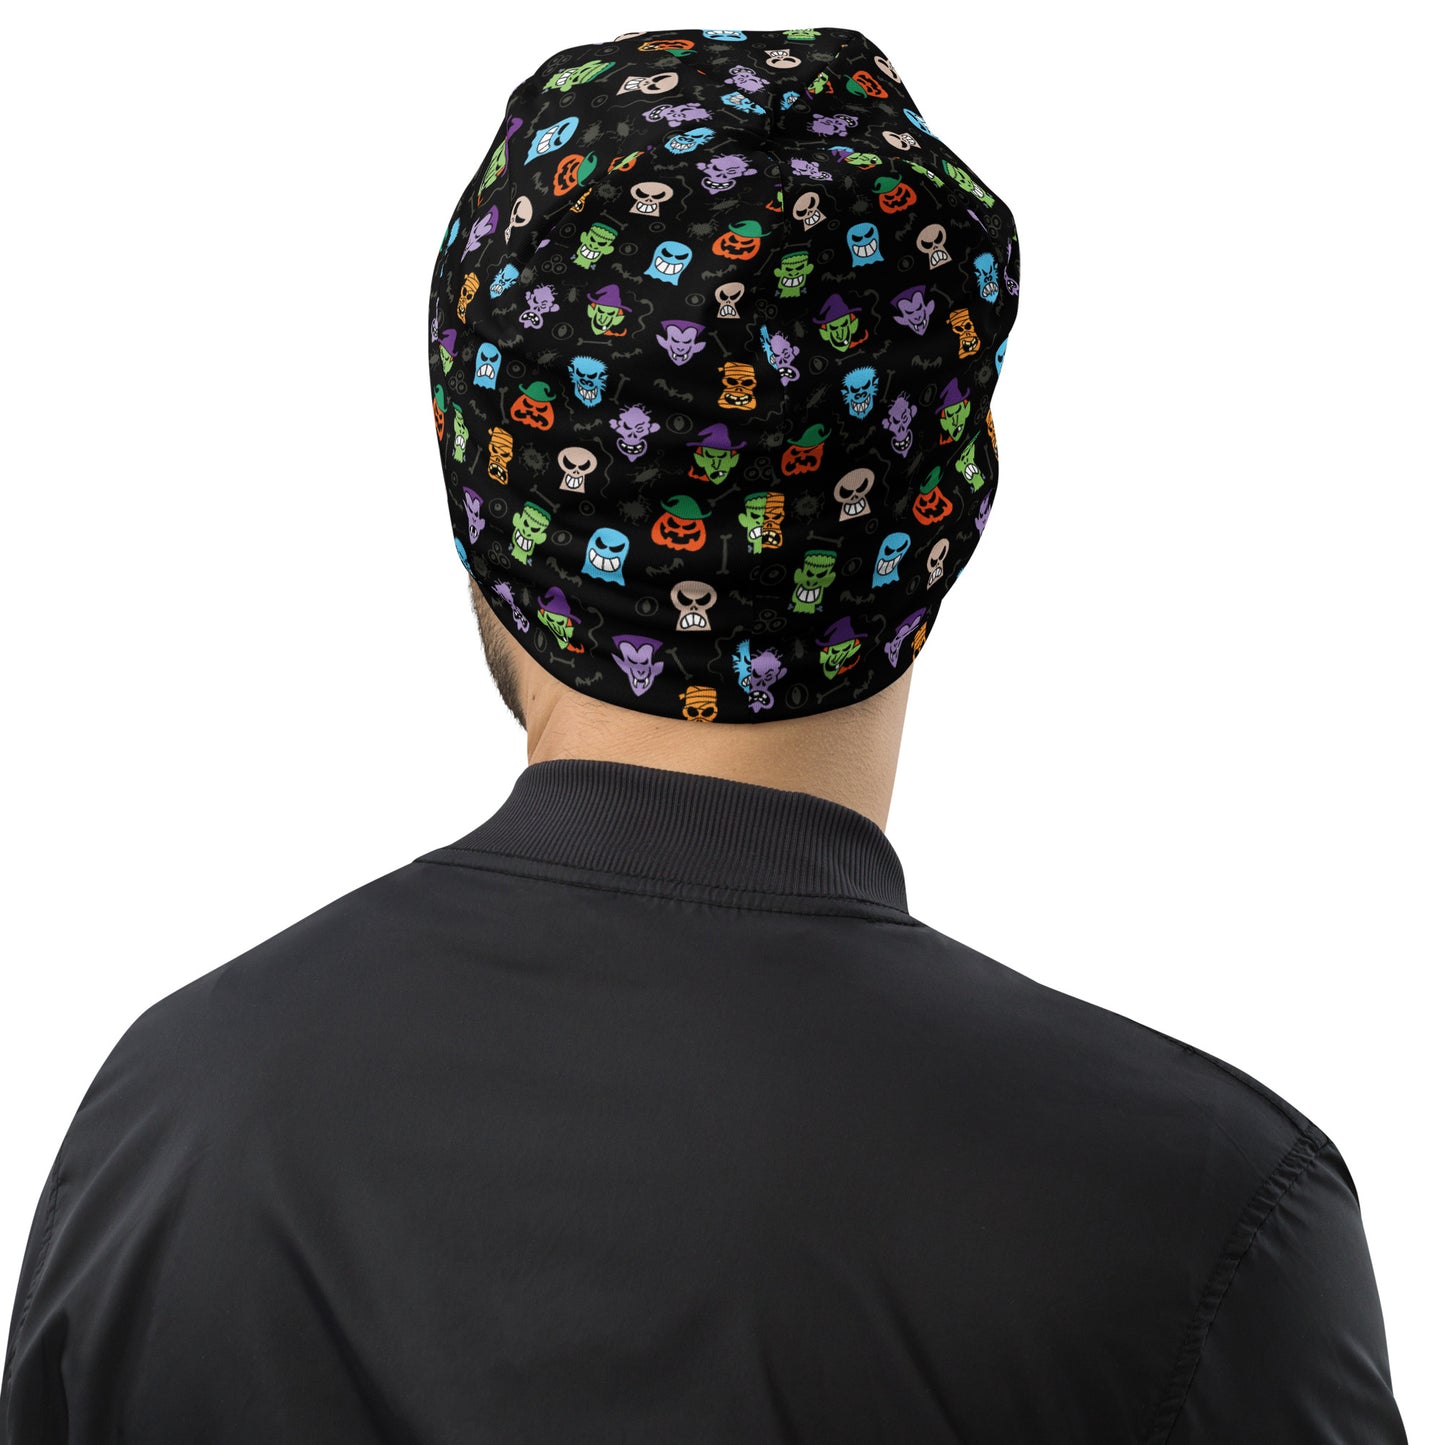 Scary Halloween faces All-Over Print Beanie. Back view